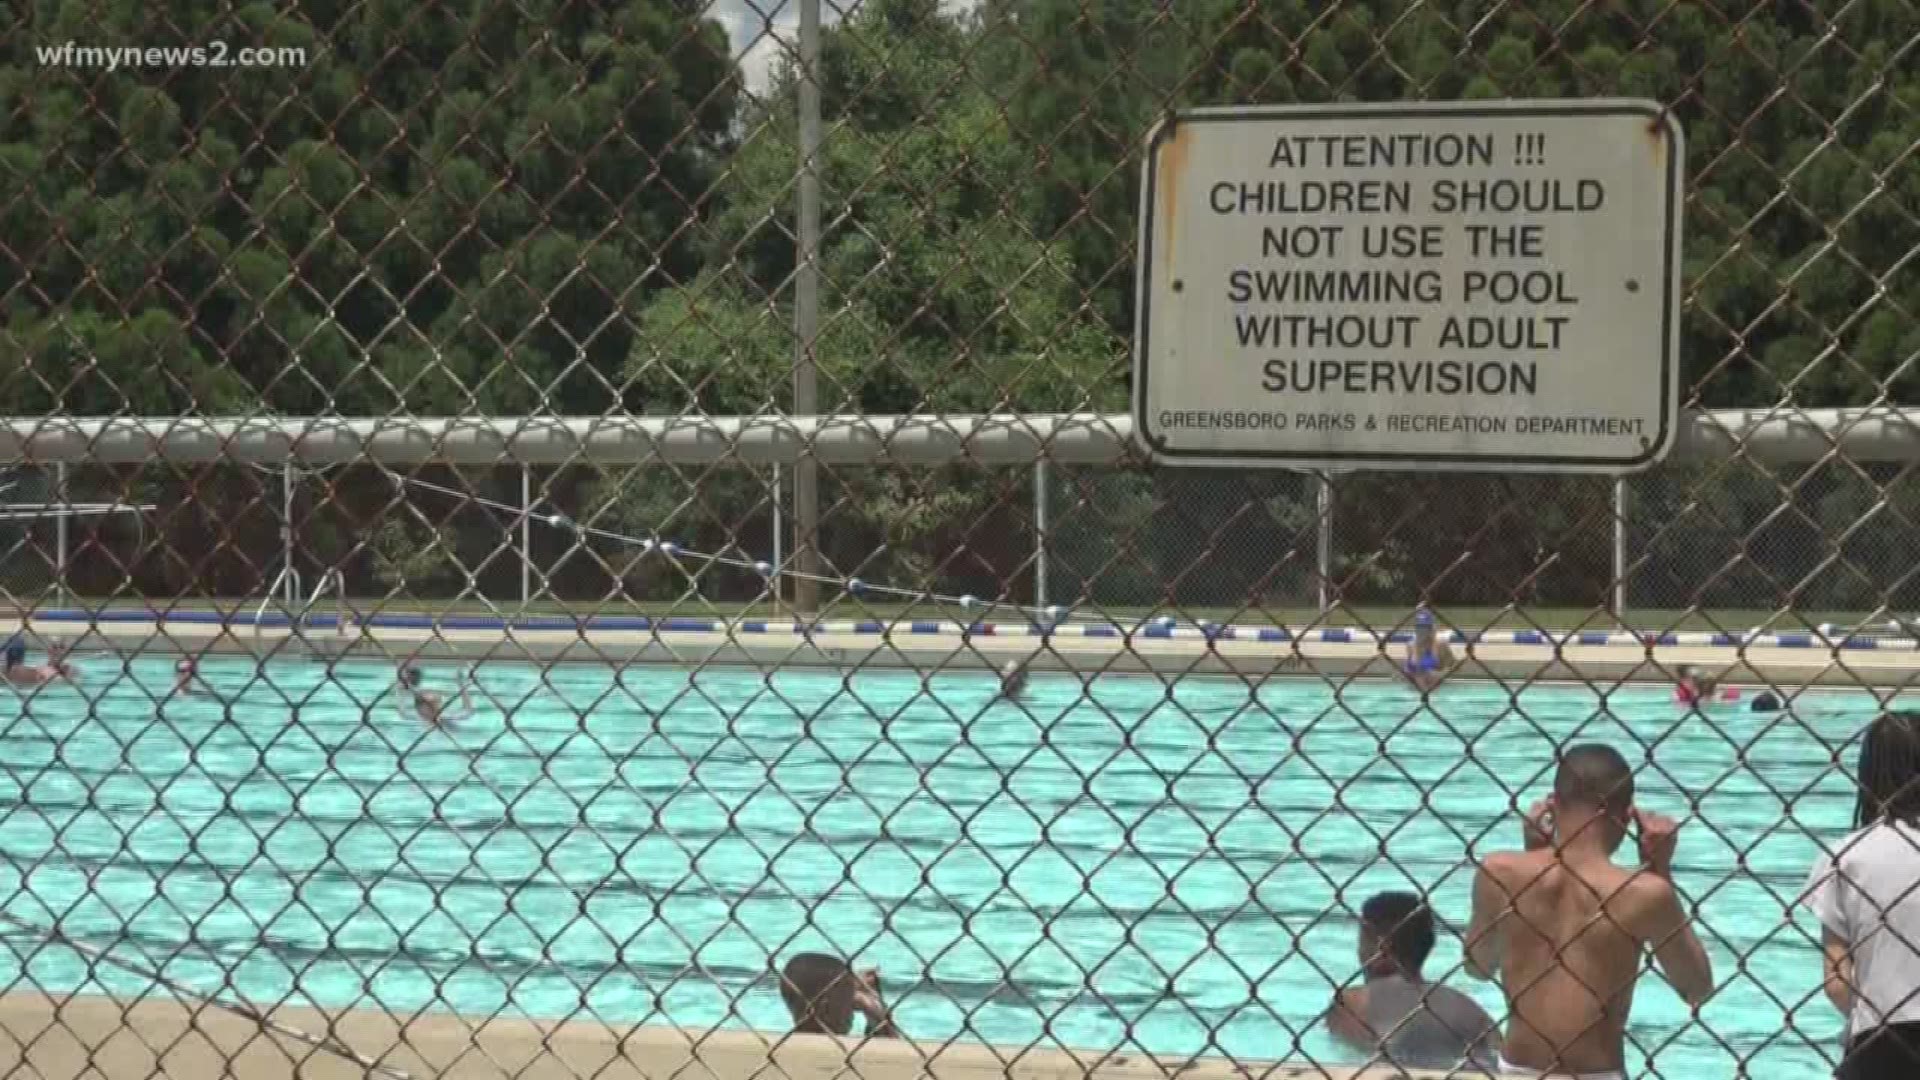 Public health officials are warning people to take precautions and protect themselves against a microscopic parasite which can live for days in swimming pools and water playgrounds.